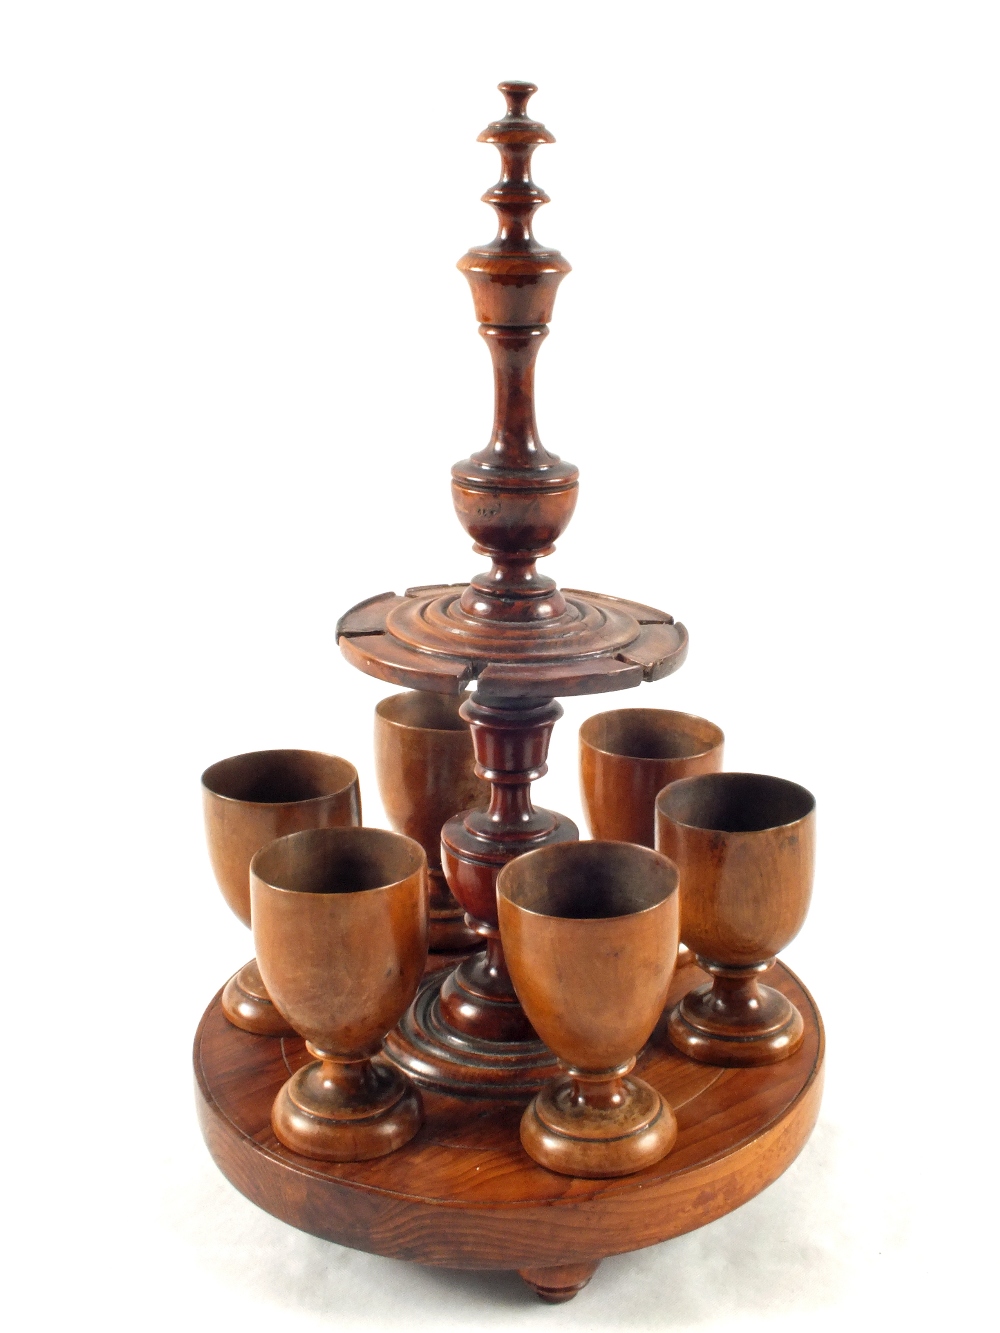 A 19th Century yew wood egg cup stand with six turned wood egg cups